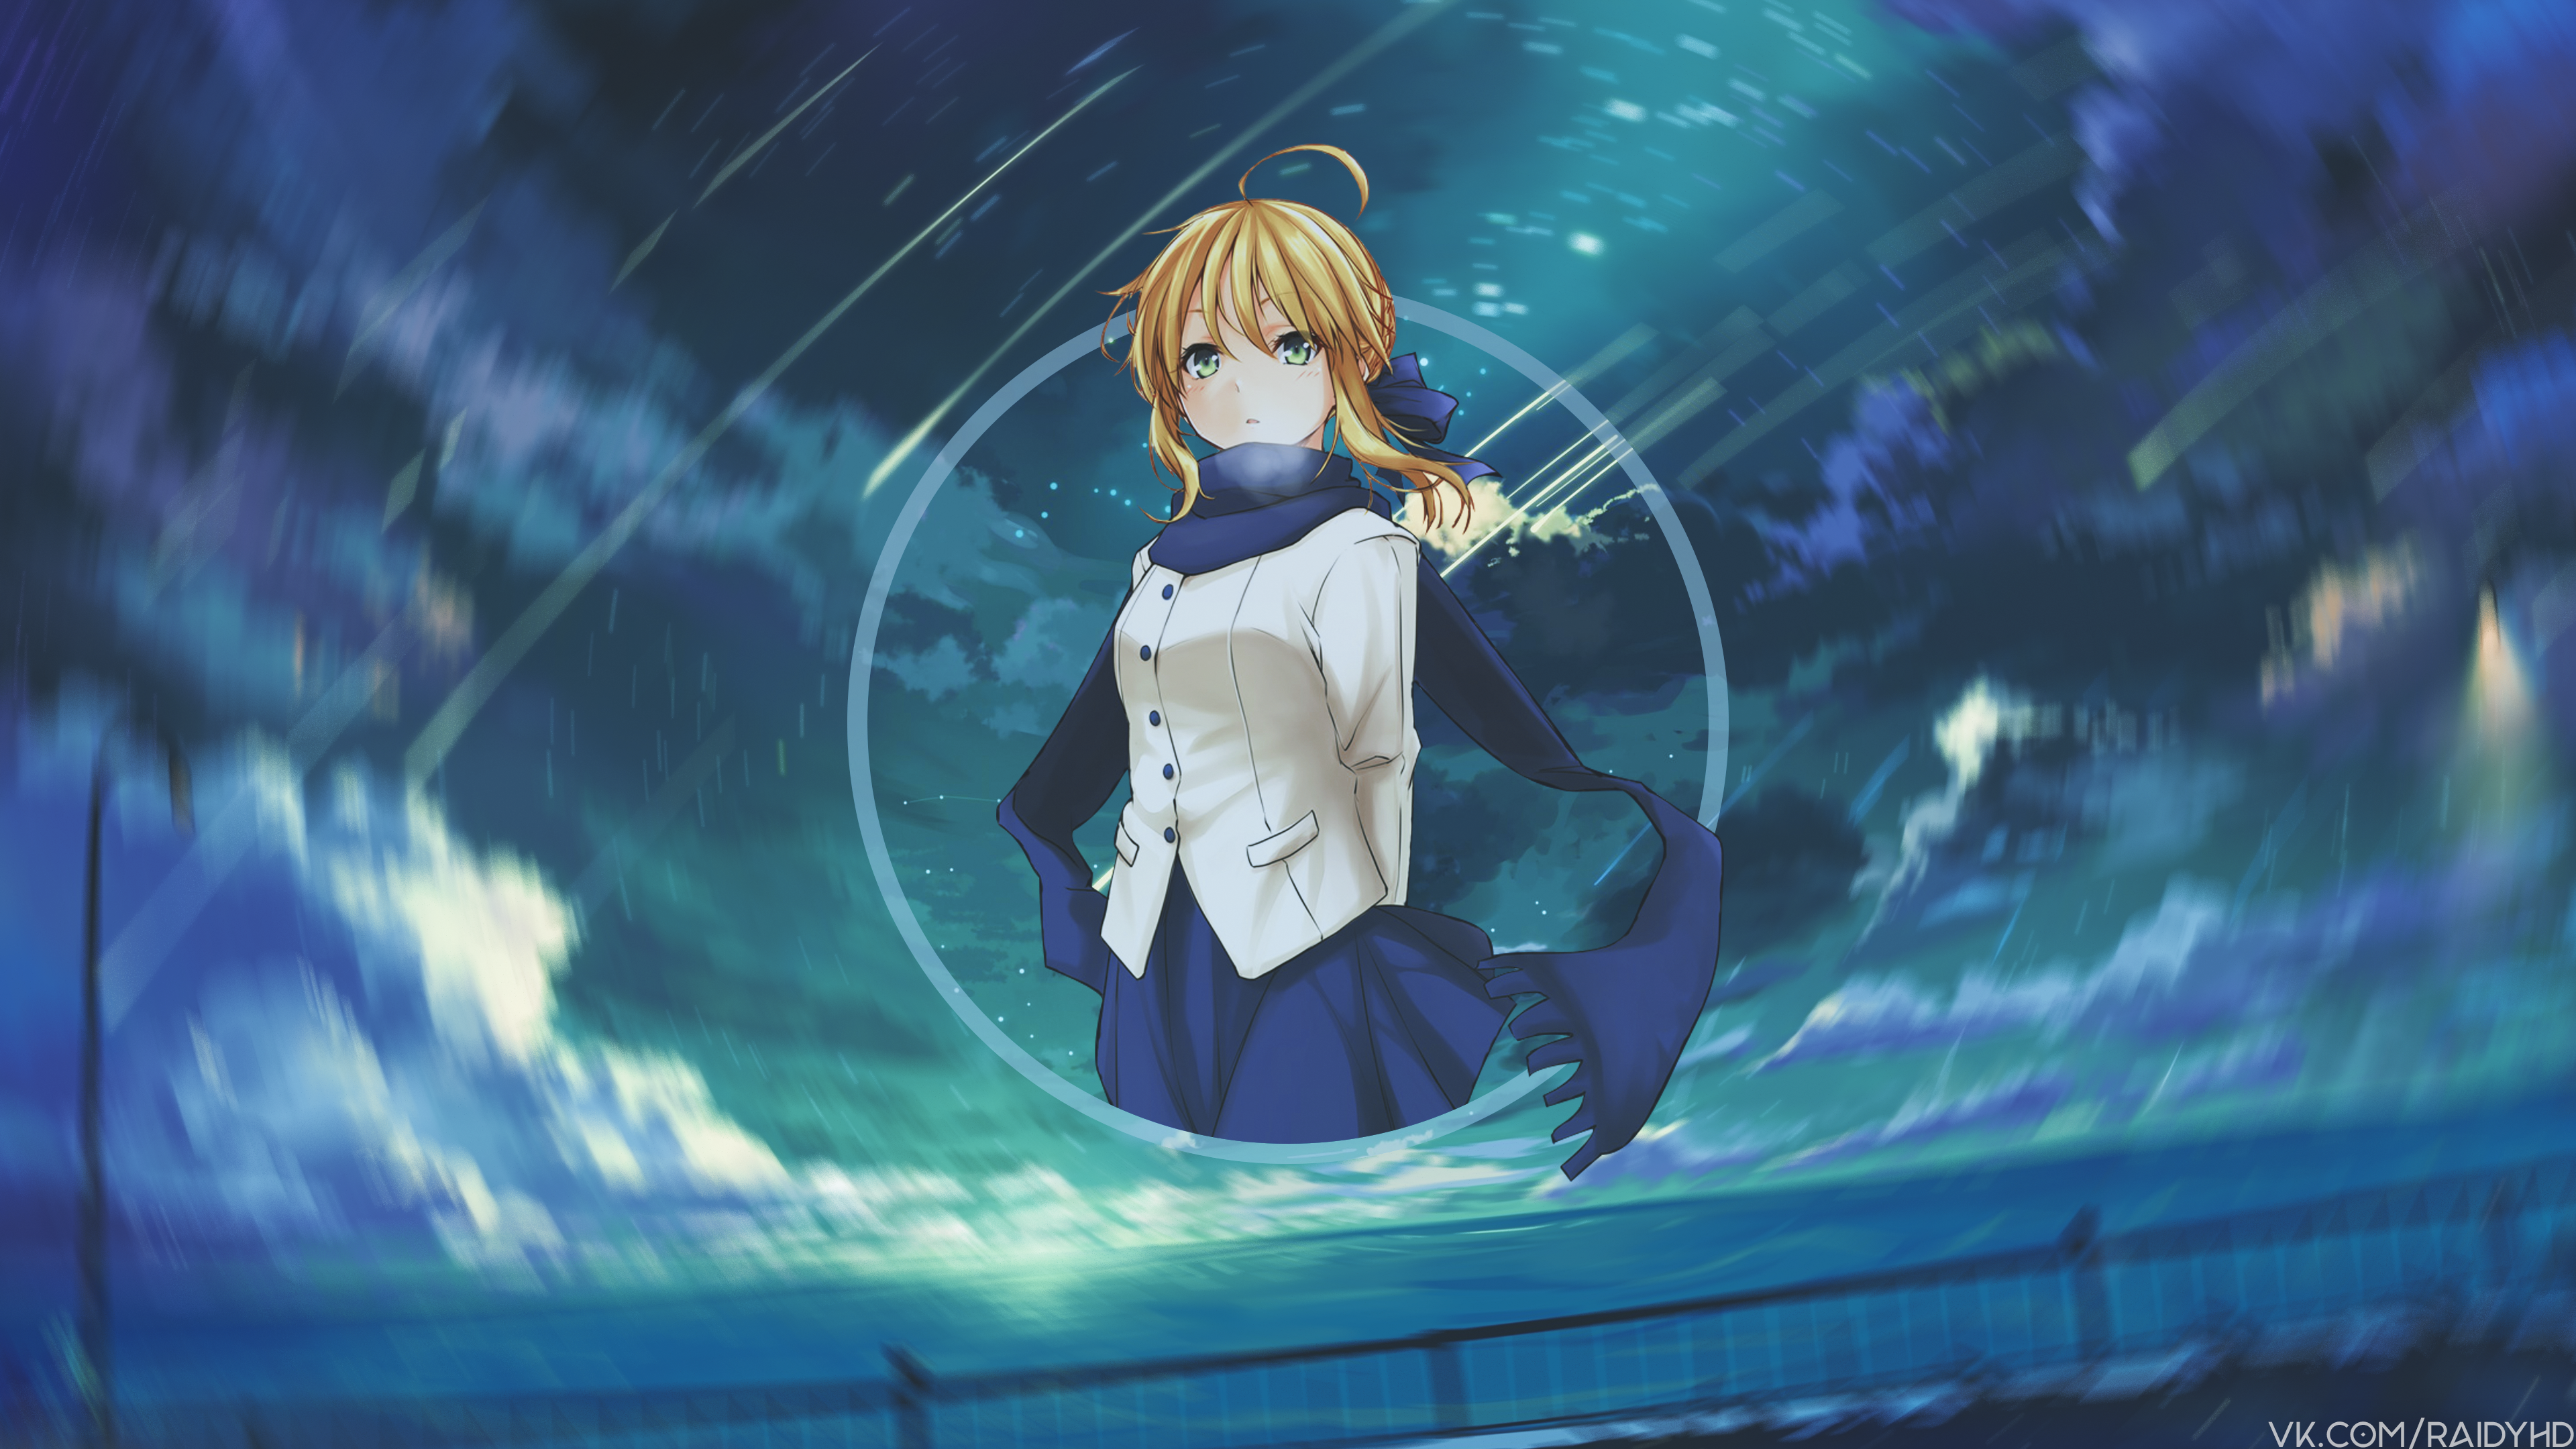 Anime 3840x2160 anime girls picture-in-picture anime Fate series Saber